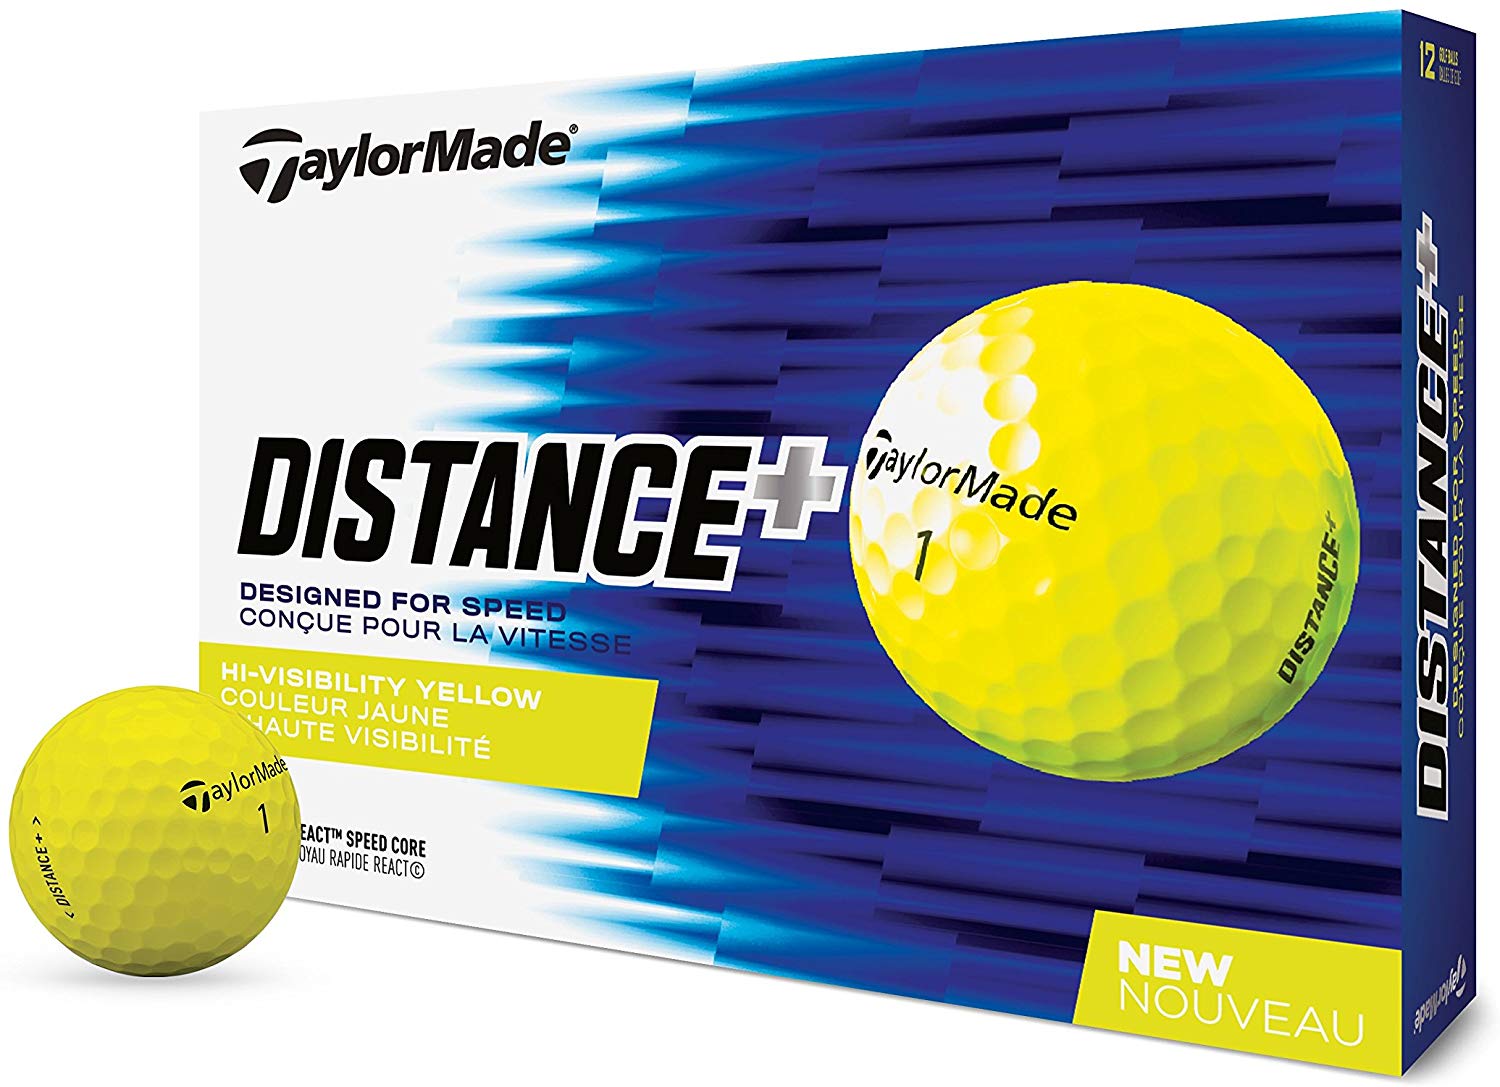 The TaylorMade Distance Plus Golf Ball Review